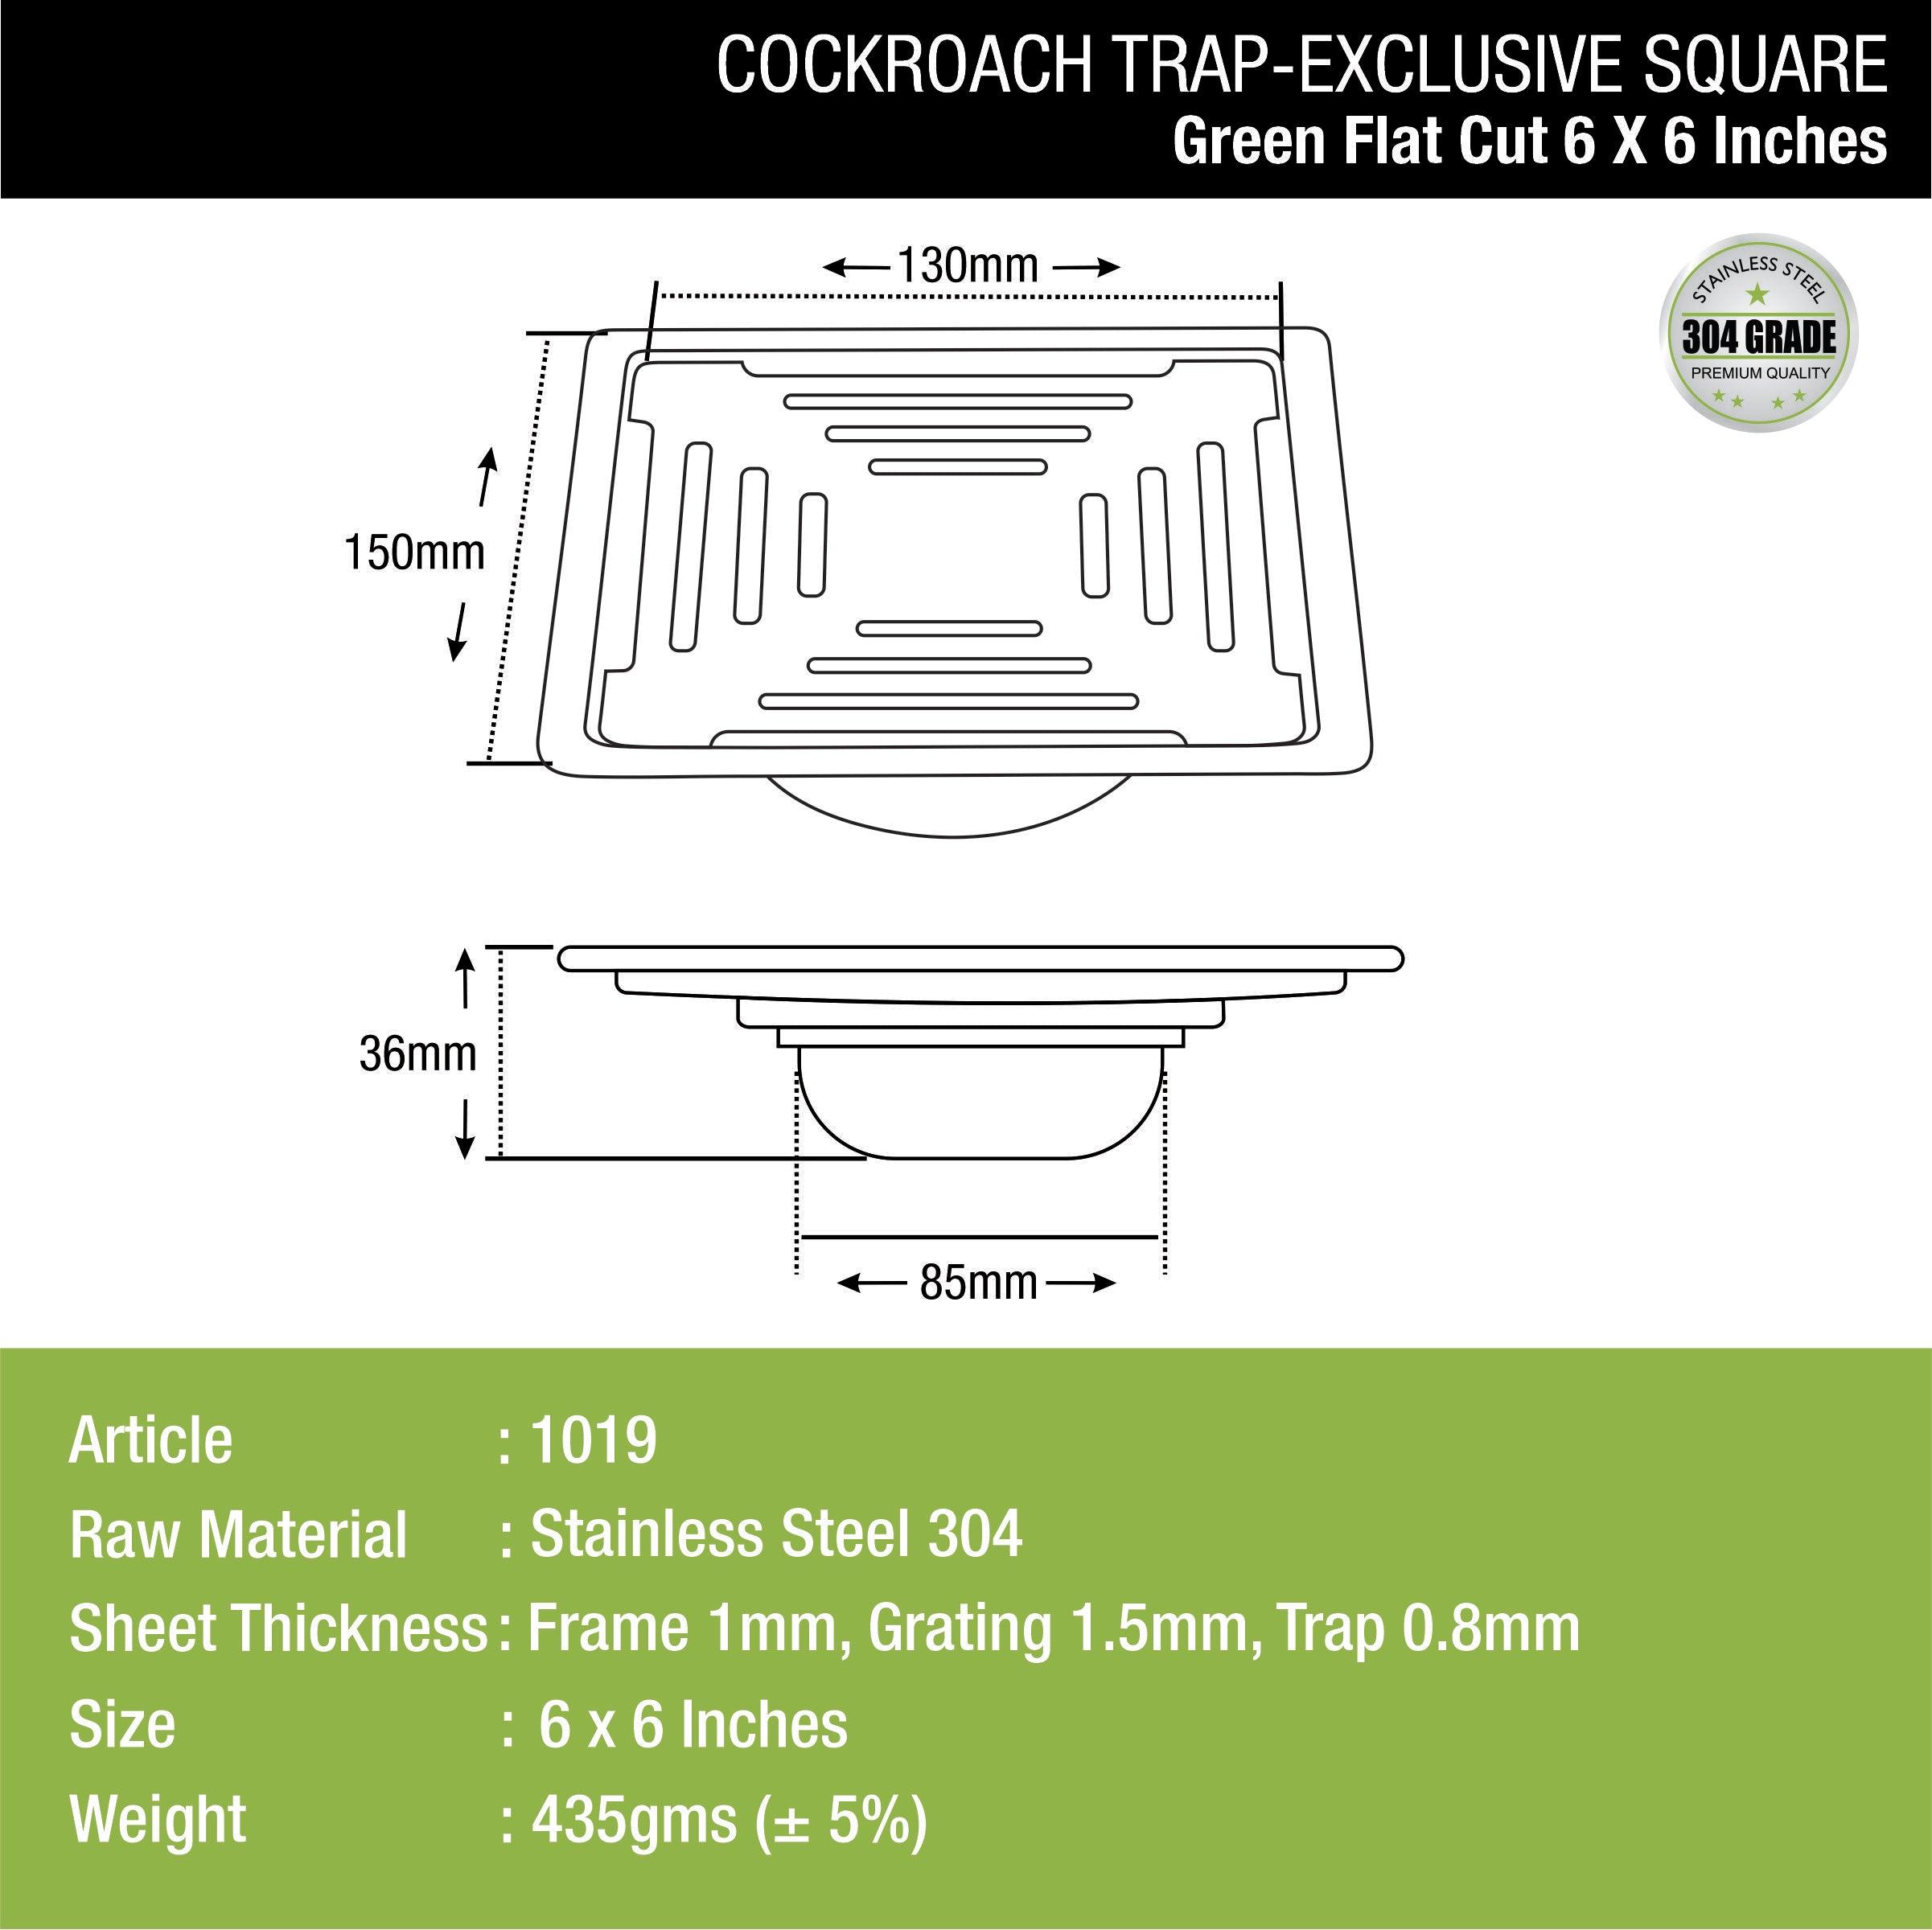 Green Exclusive Square Flat Cut Floor Drain (6 x 6 Inches) with Cockroach Trap dimensions and sizes